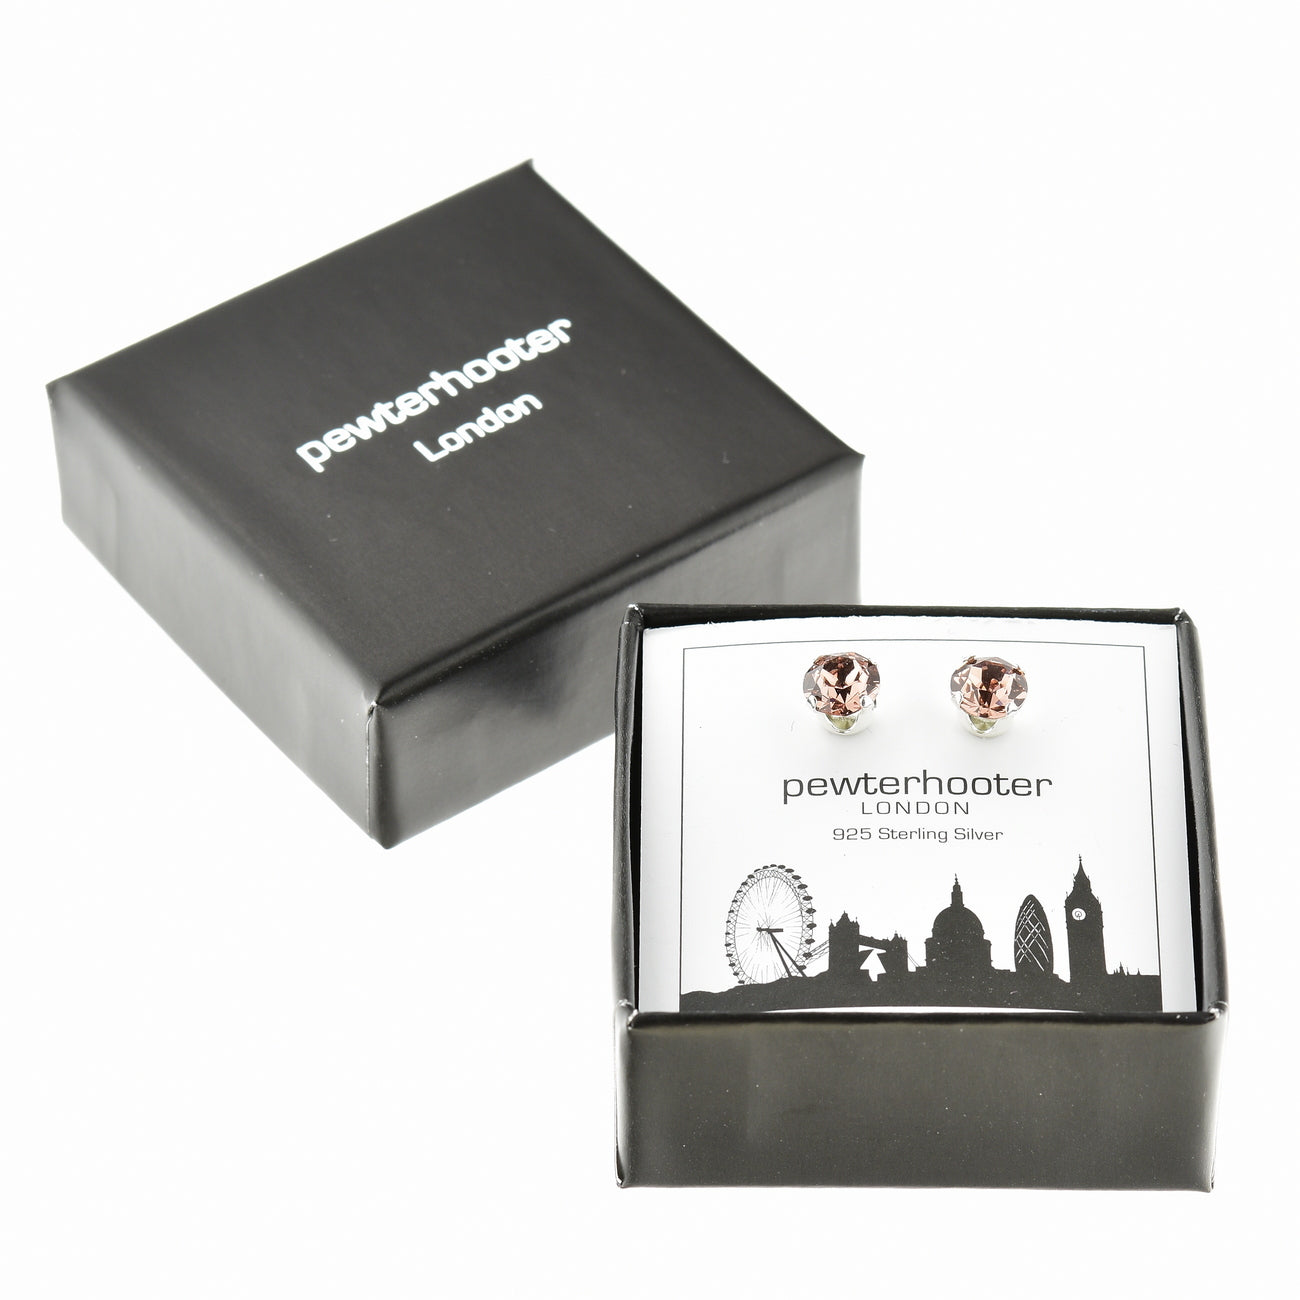 pewterhooter® Women's Classic Collection 925 Sterling silver earrings with sparkling Blush Rose crystals, packaged in a gift box for any occasion.